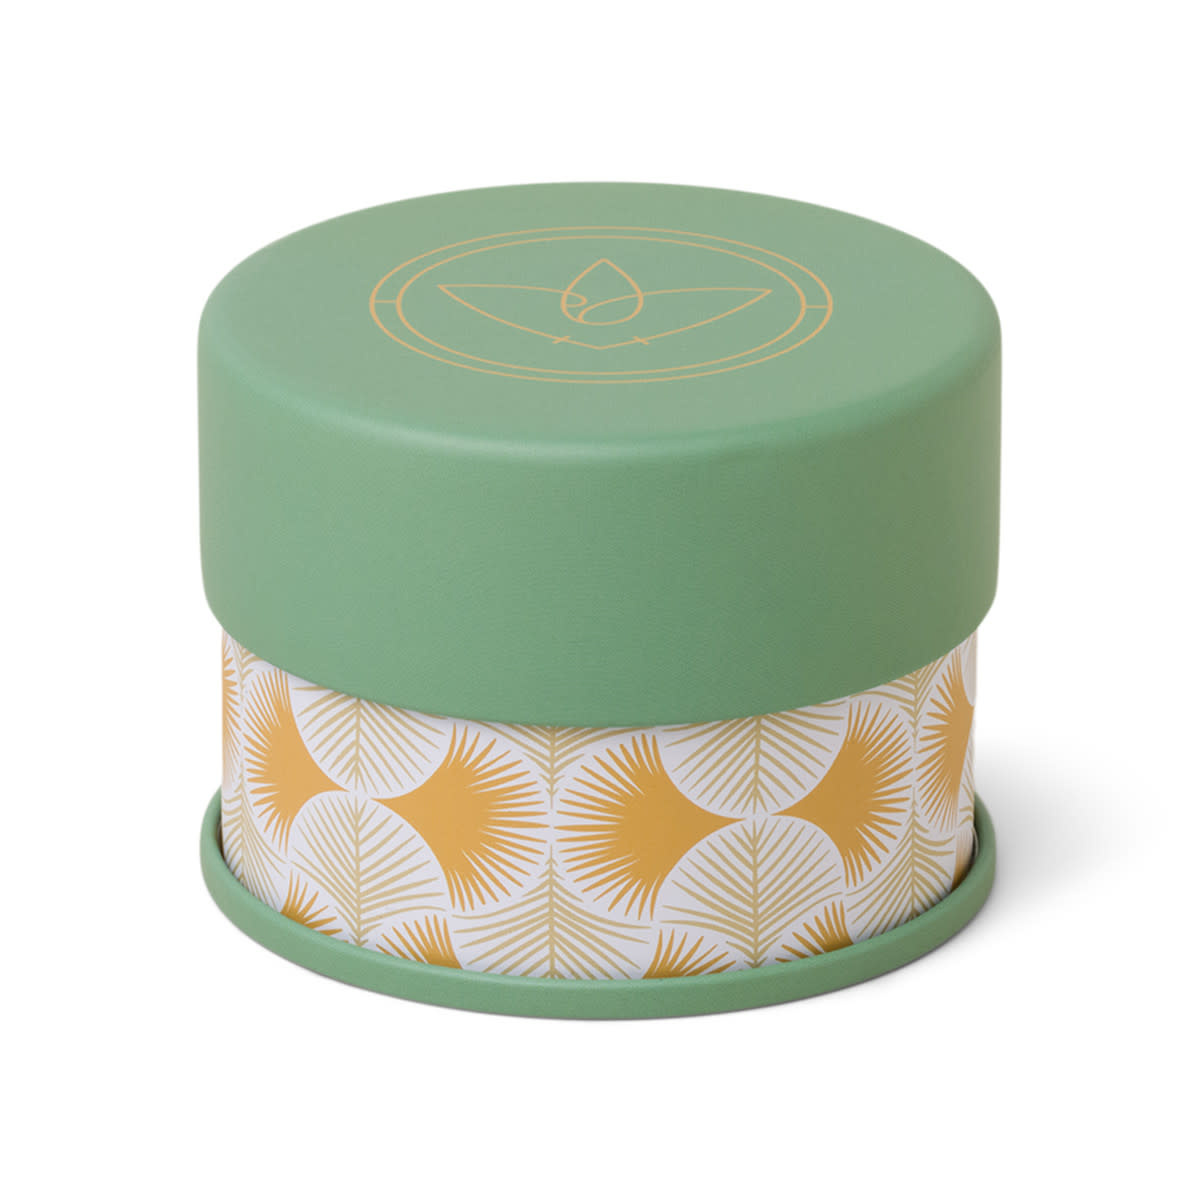 paddywax Terrace Patterned Candle with Green Lid